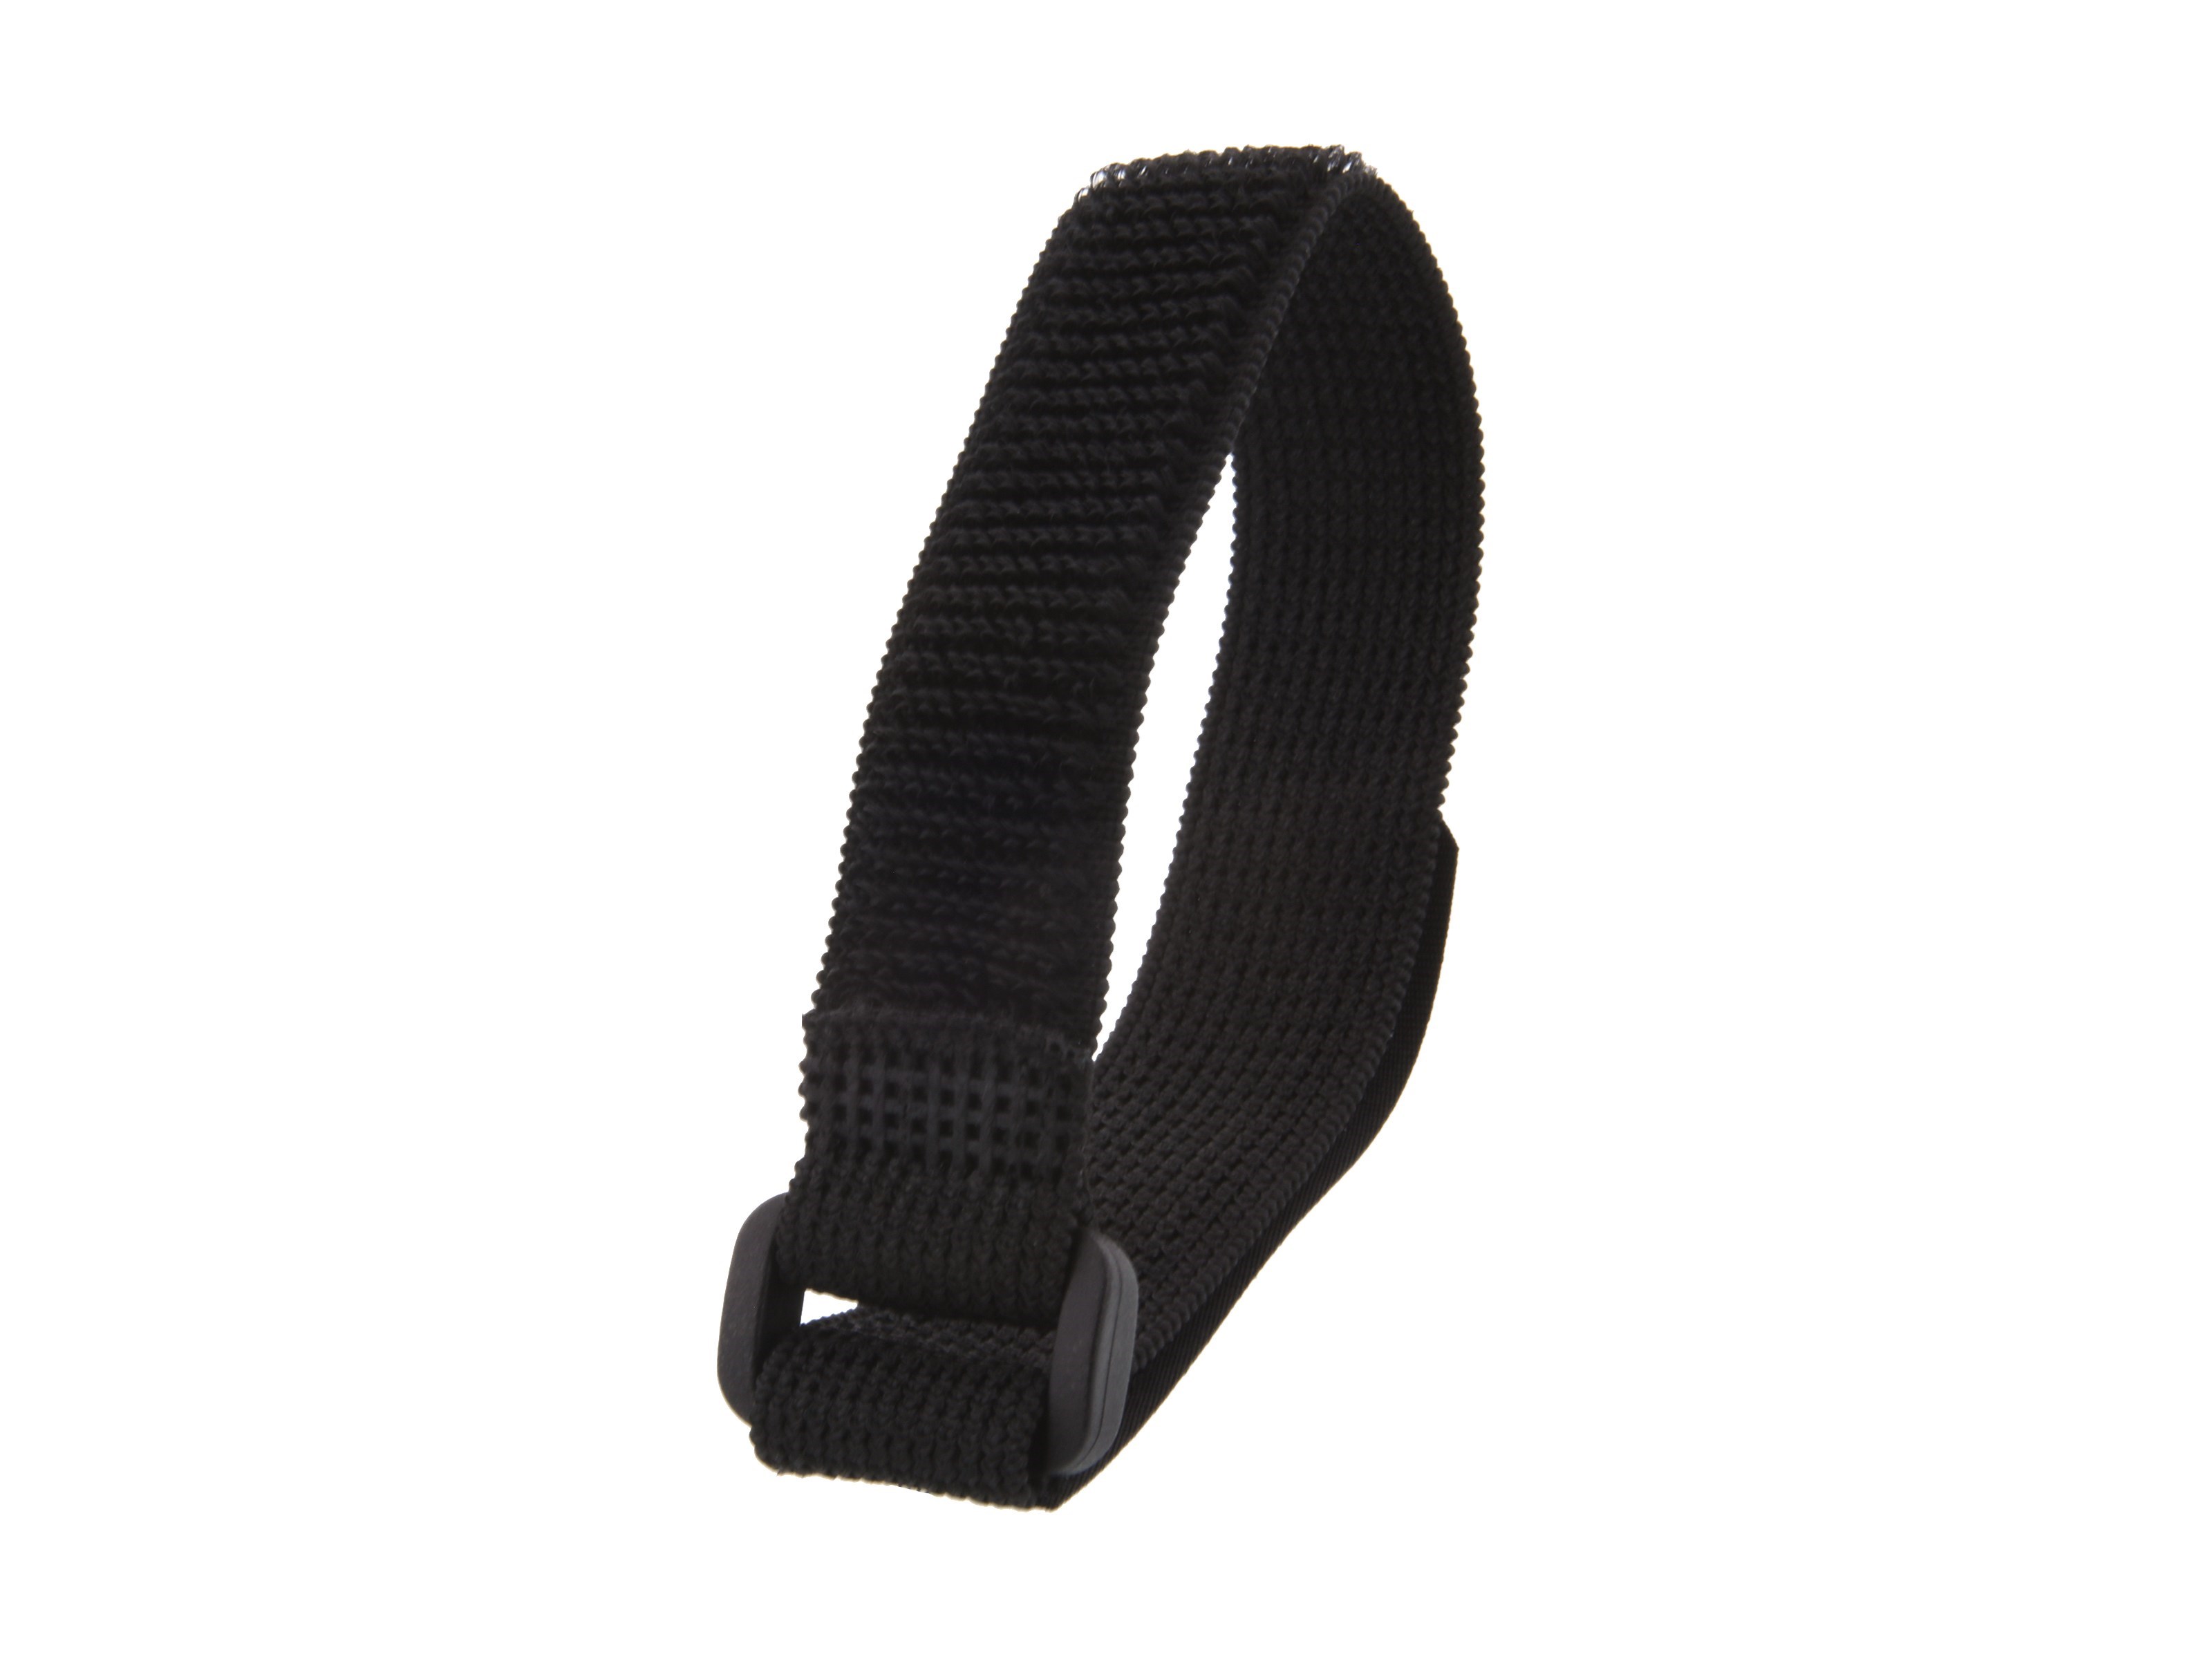 https://www.securecableties.com/content/images/thumbs/000/0005276_all-purpose-elastic-cinch-strap-12-inch-5-pack.jpeg